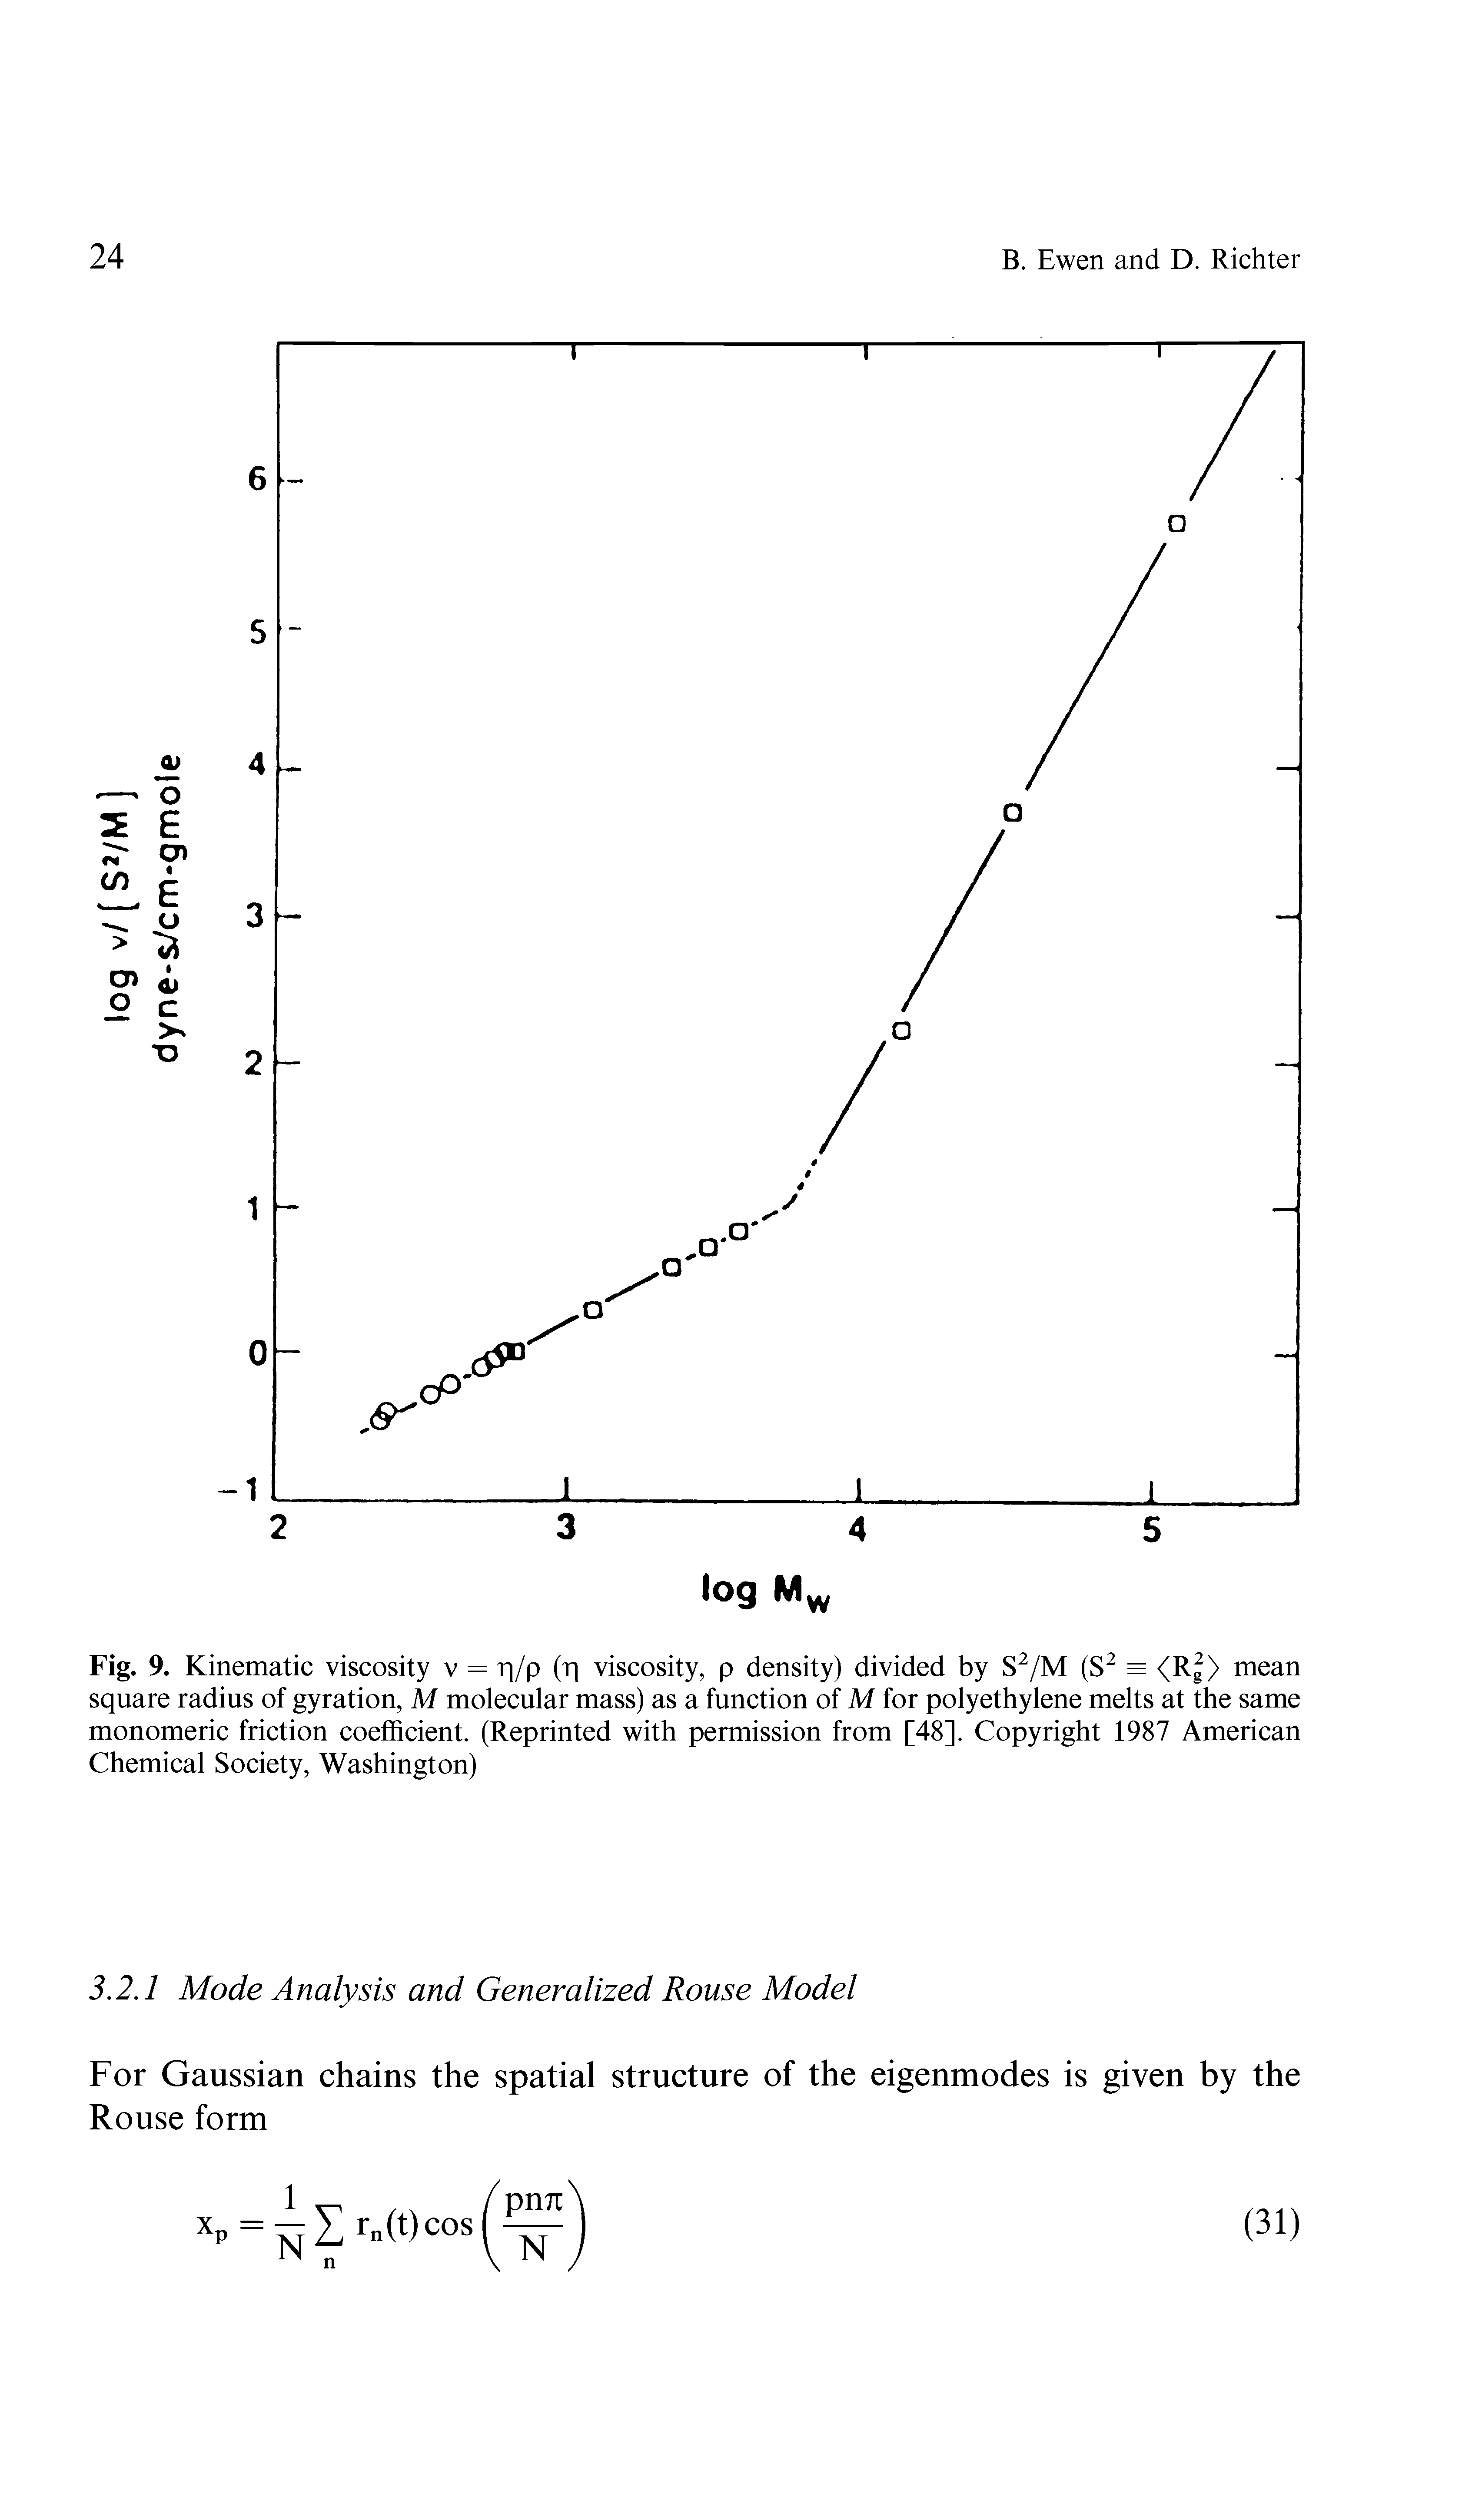 Fig. 9. Kinematic viscosity v = r /p (r viscosity, p density) divided by S2/M (S2 = mean square radius of gyration, M molecular mass) as a function of M for polyethylene melts at the same monomeric friction coefficient. (Reprinted with permission from [48]. Copyright 1987 American Chemical Society, Washington)...